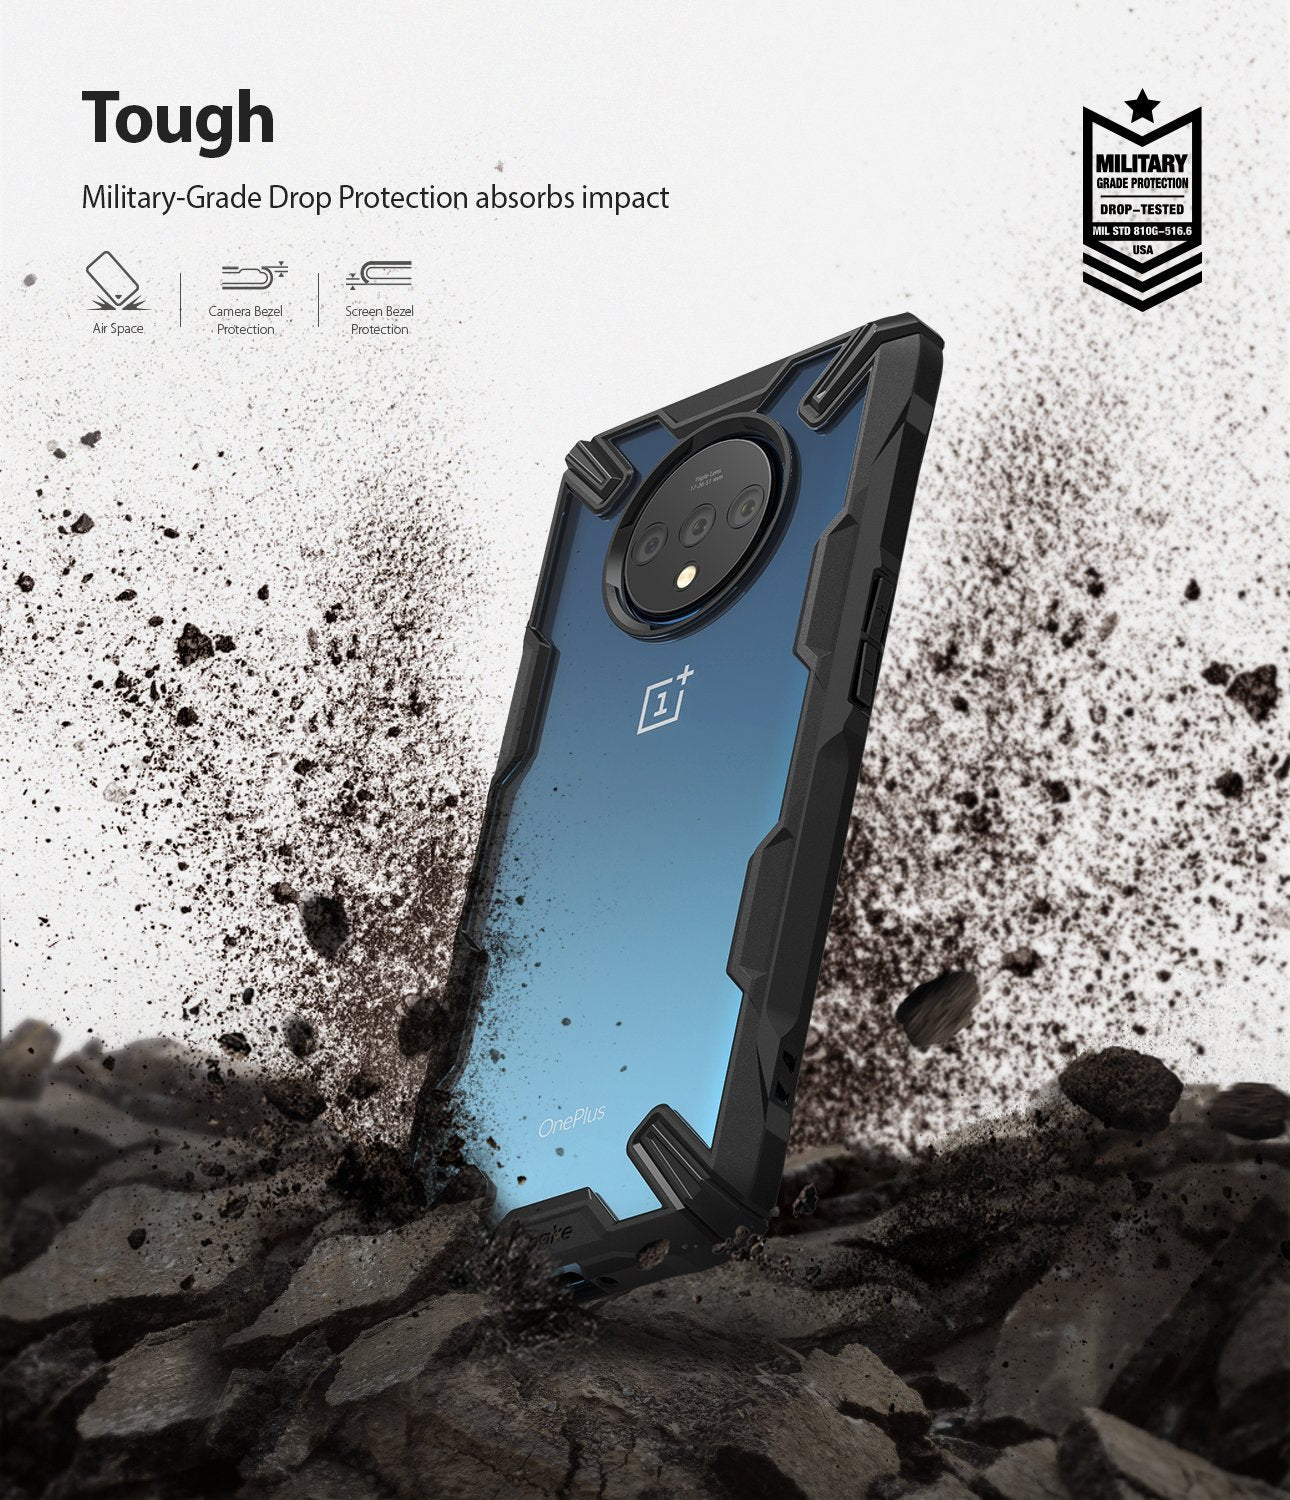 Ringke™ Fusion-X Case for OnePlus 7 & 7T